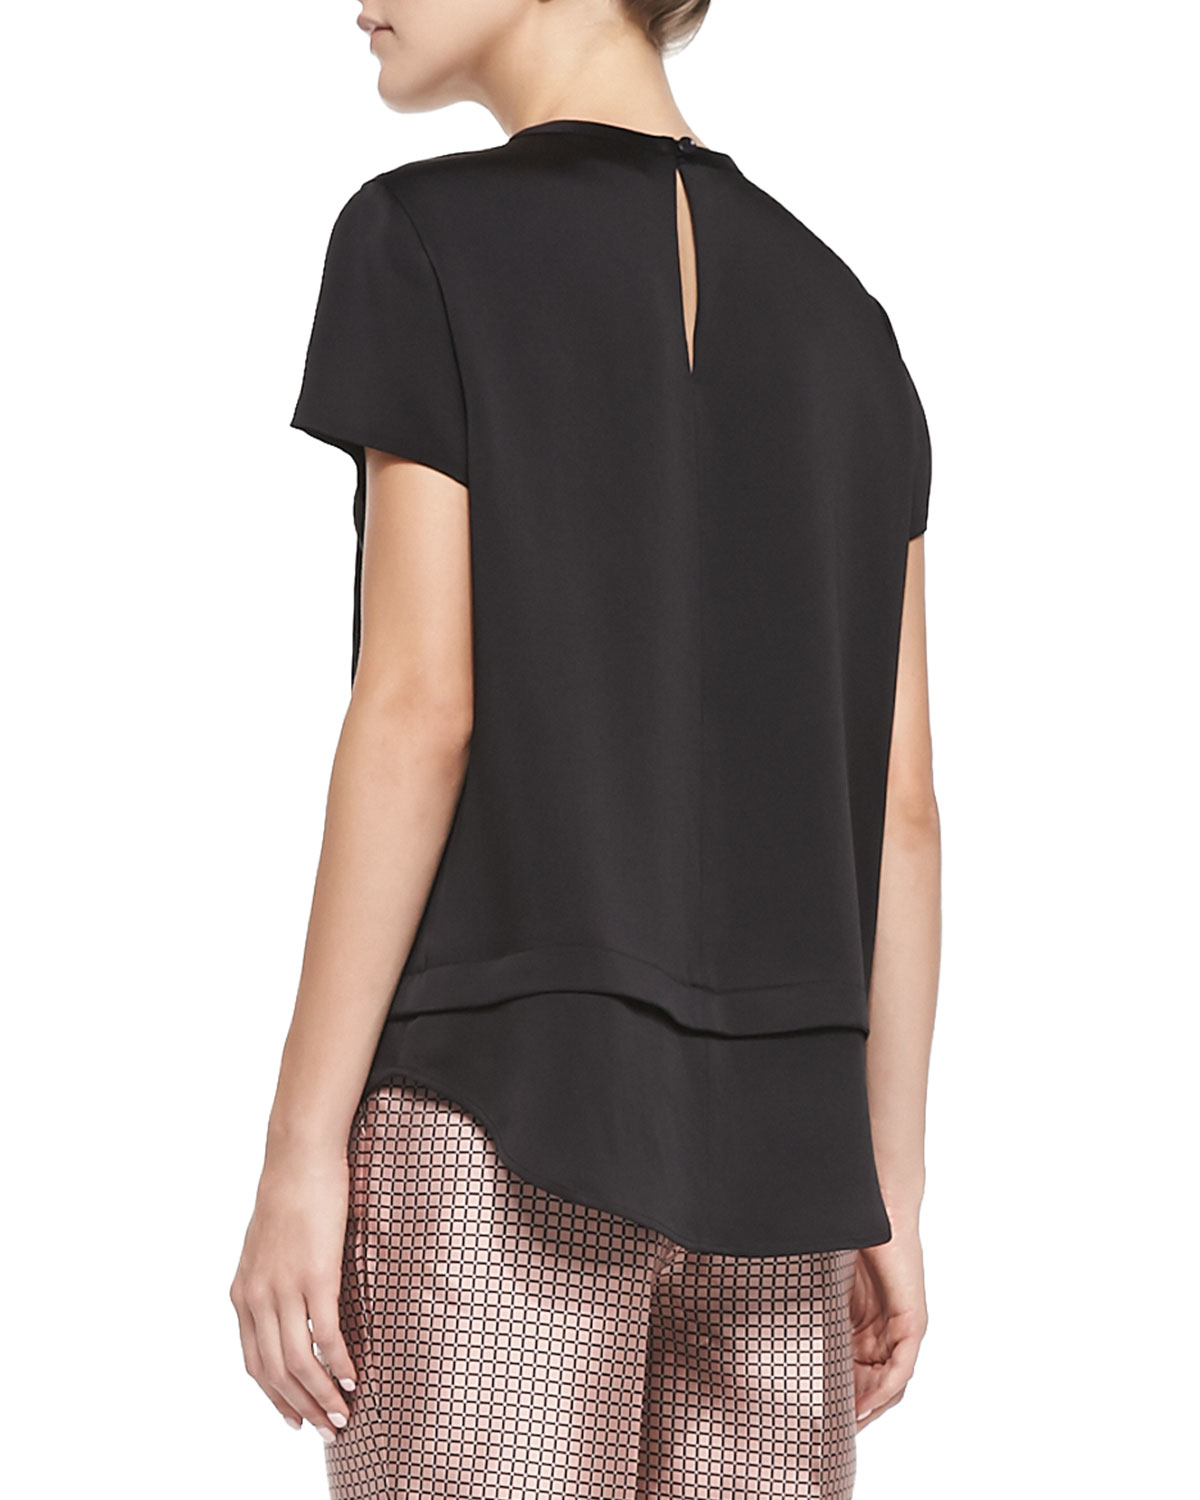 Lyst - Kate Spade New York Steffi Satin-finished Short-sleeve Top in Black